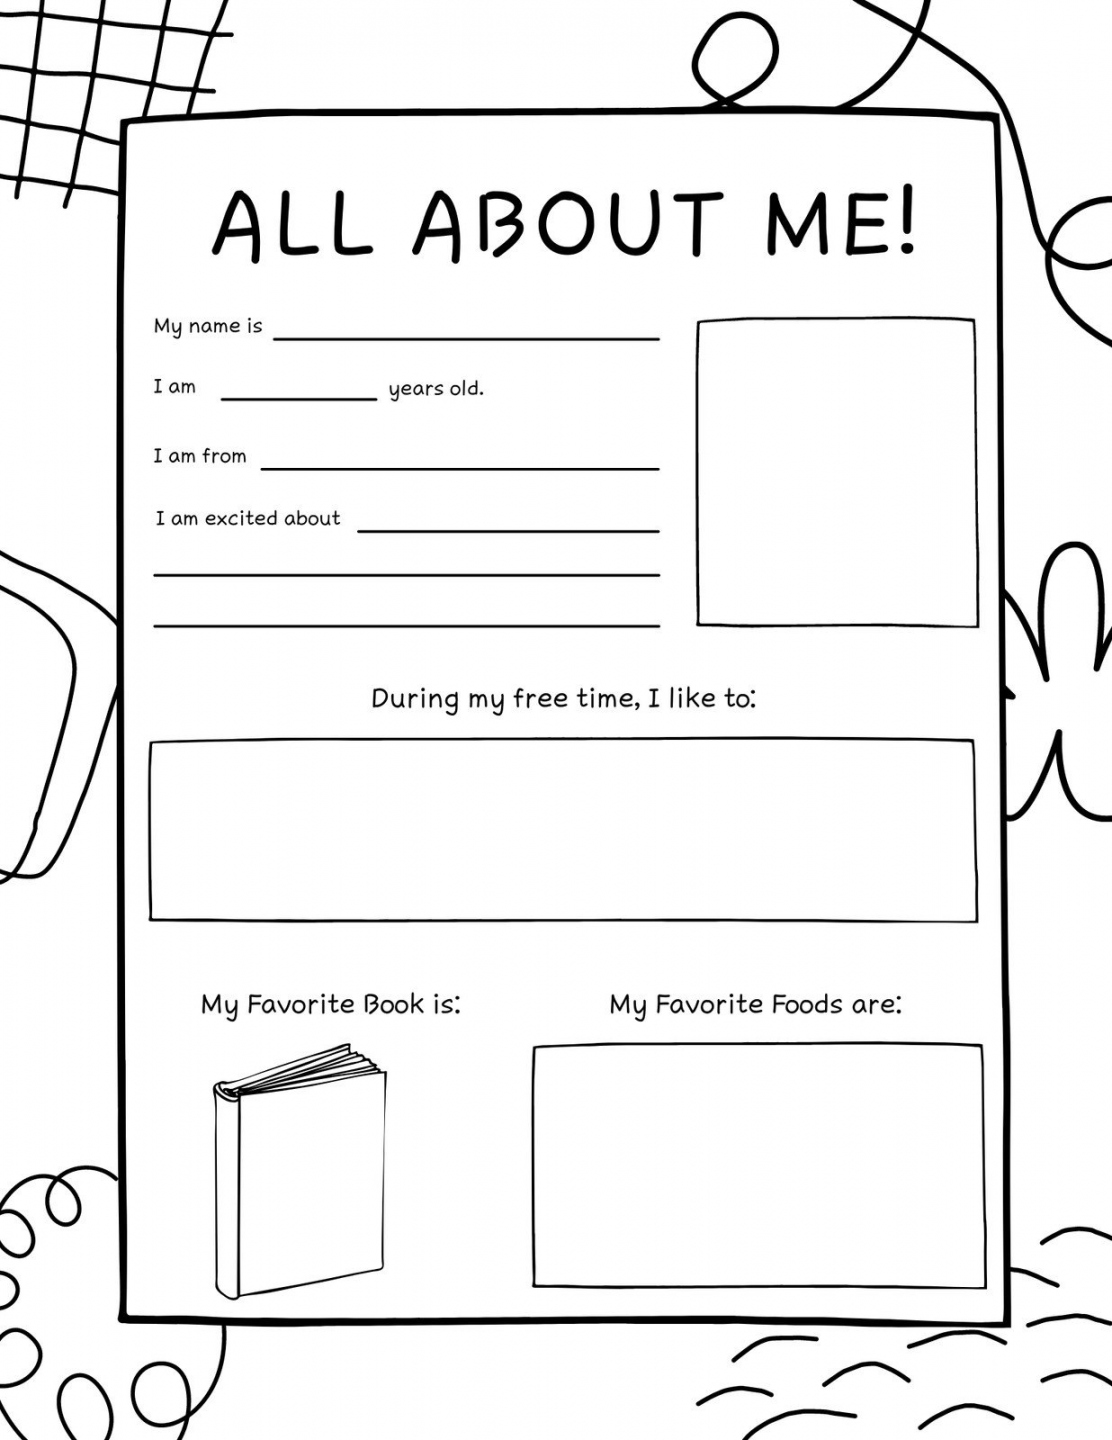 Free and printable All About Me worksheet templates  Canva - FREE Printables - Free Printable All About Me Worksheet